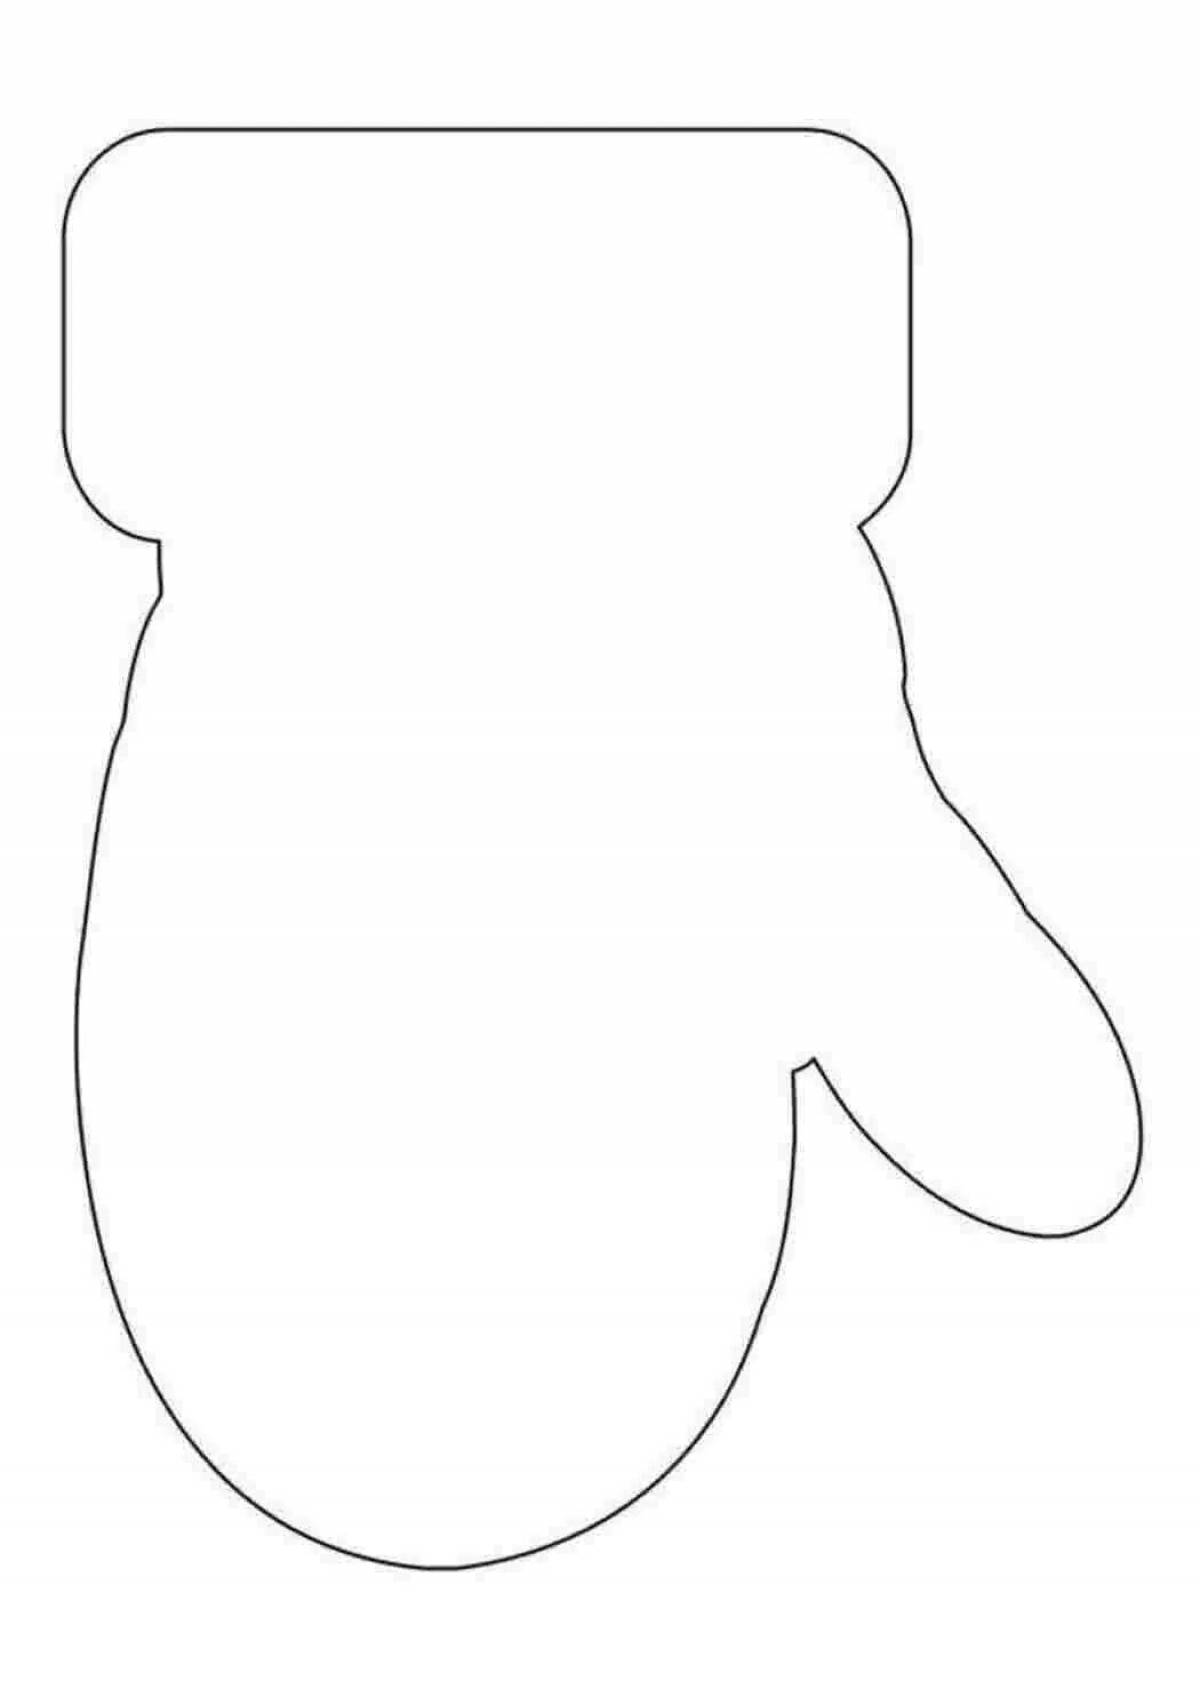 Glossy mitten outline